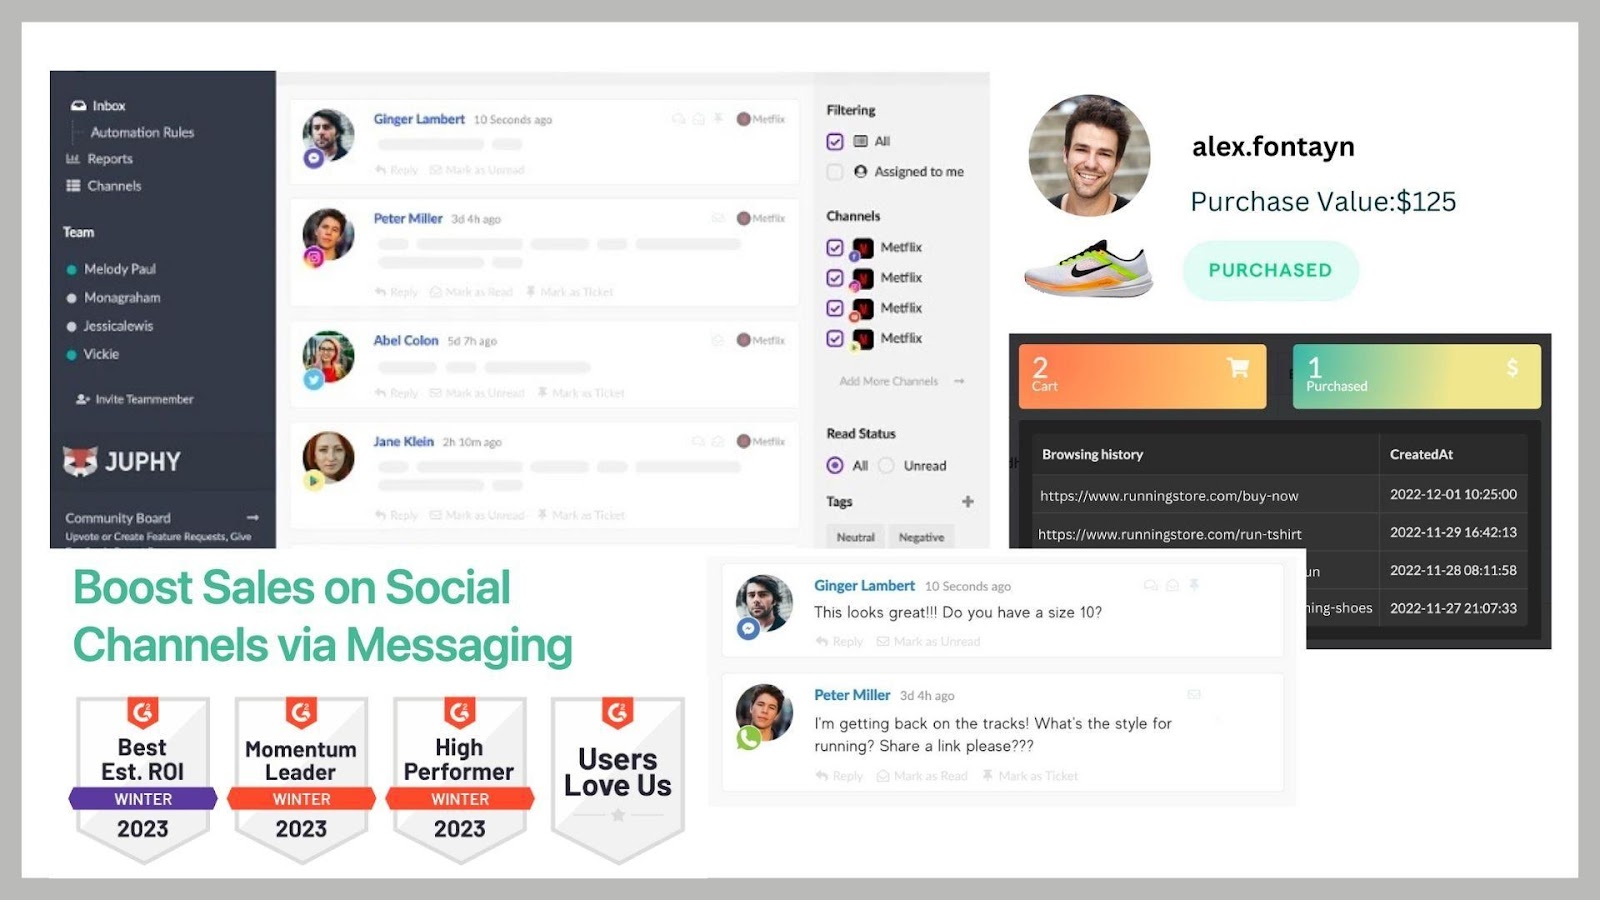 Discover Juphy’s new social selling features and make the most of your marketing efforts.